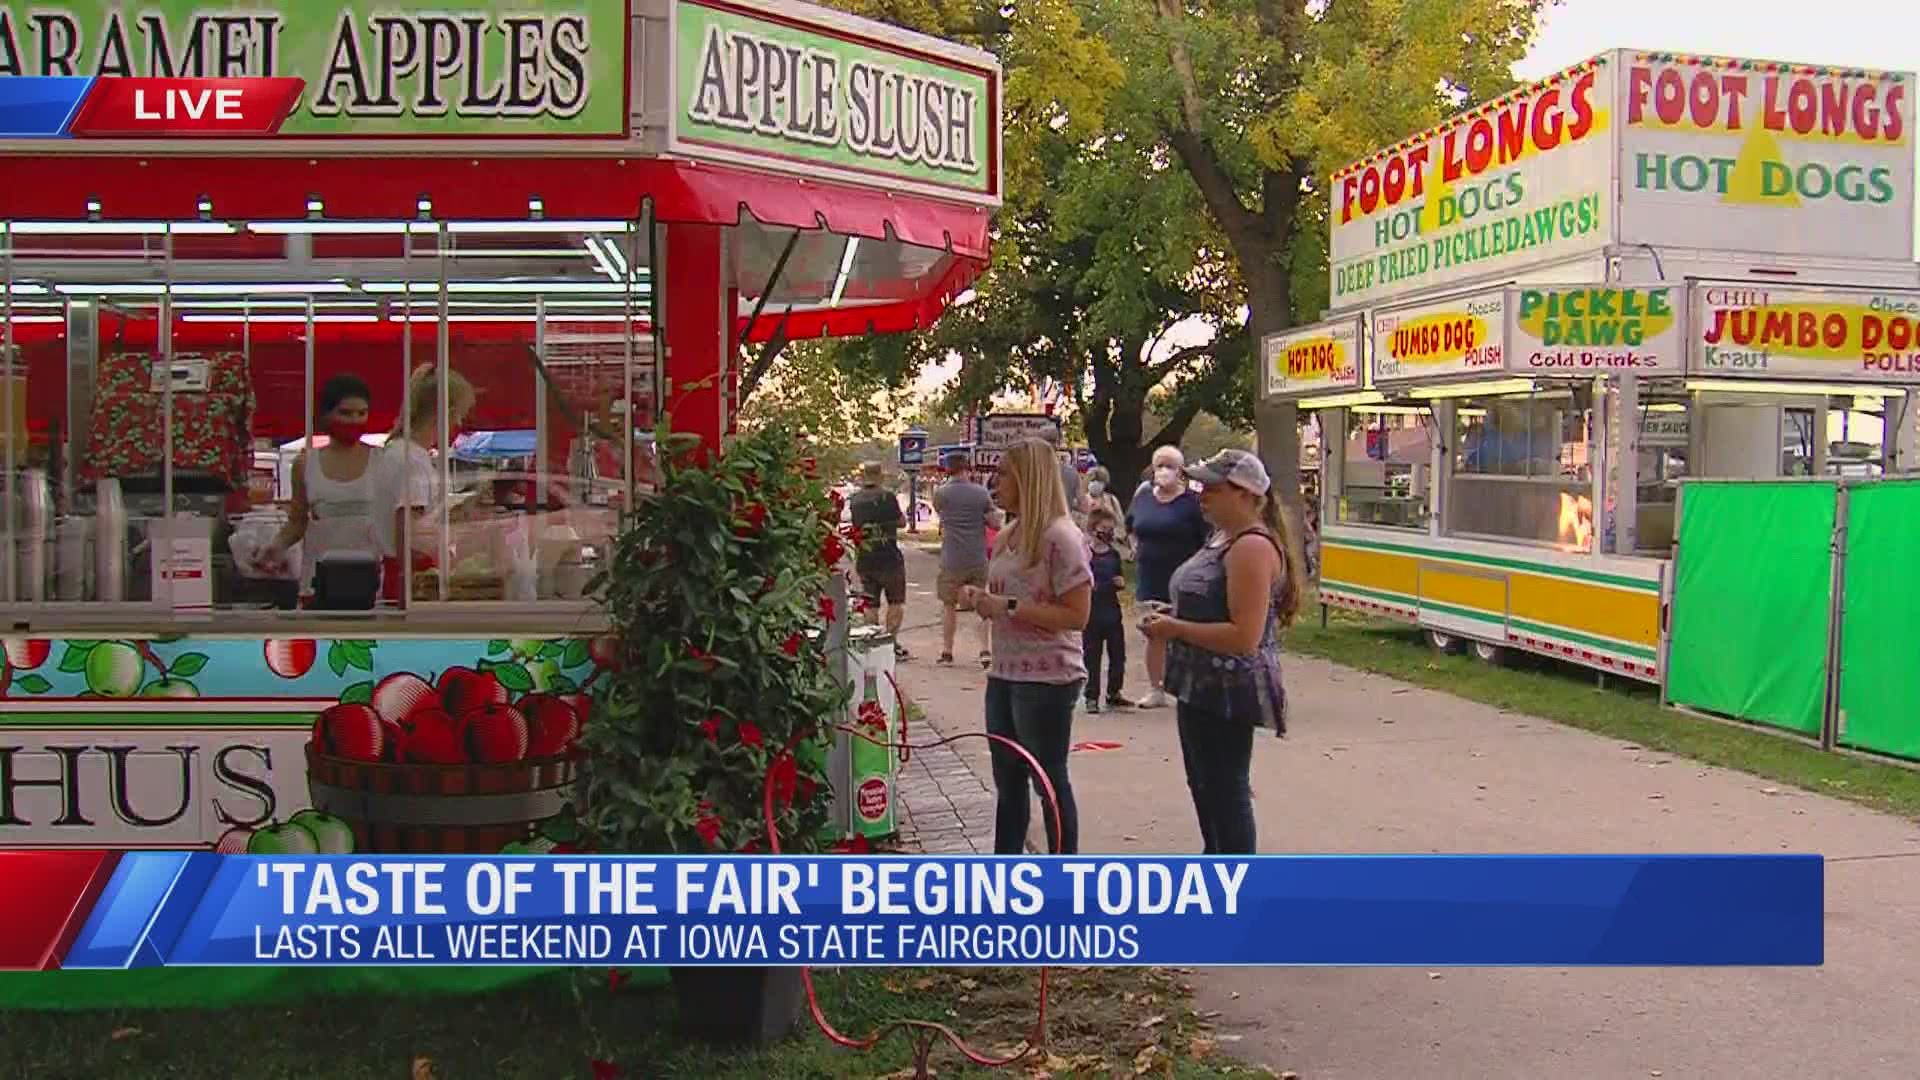 Taste of the Fair at the Iowa State Fairgrounds